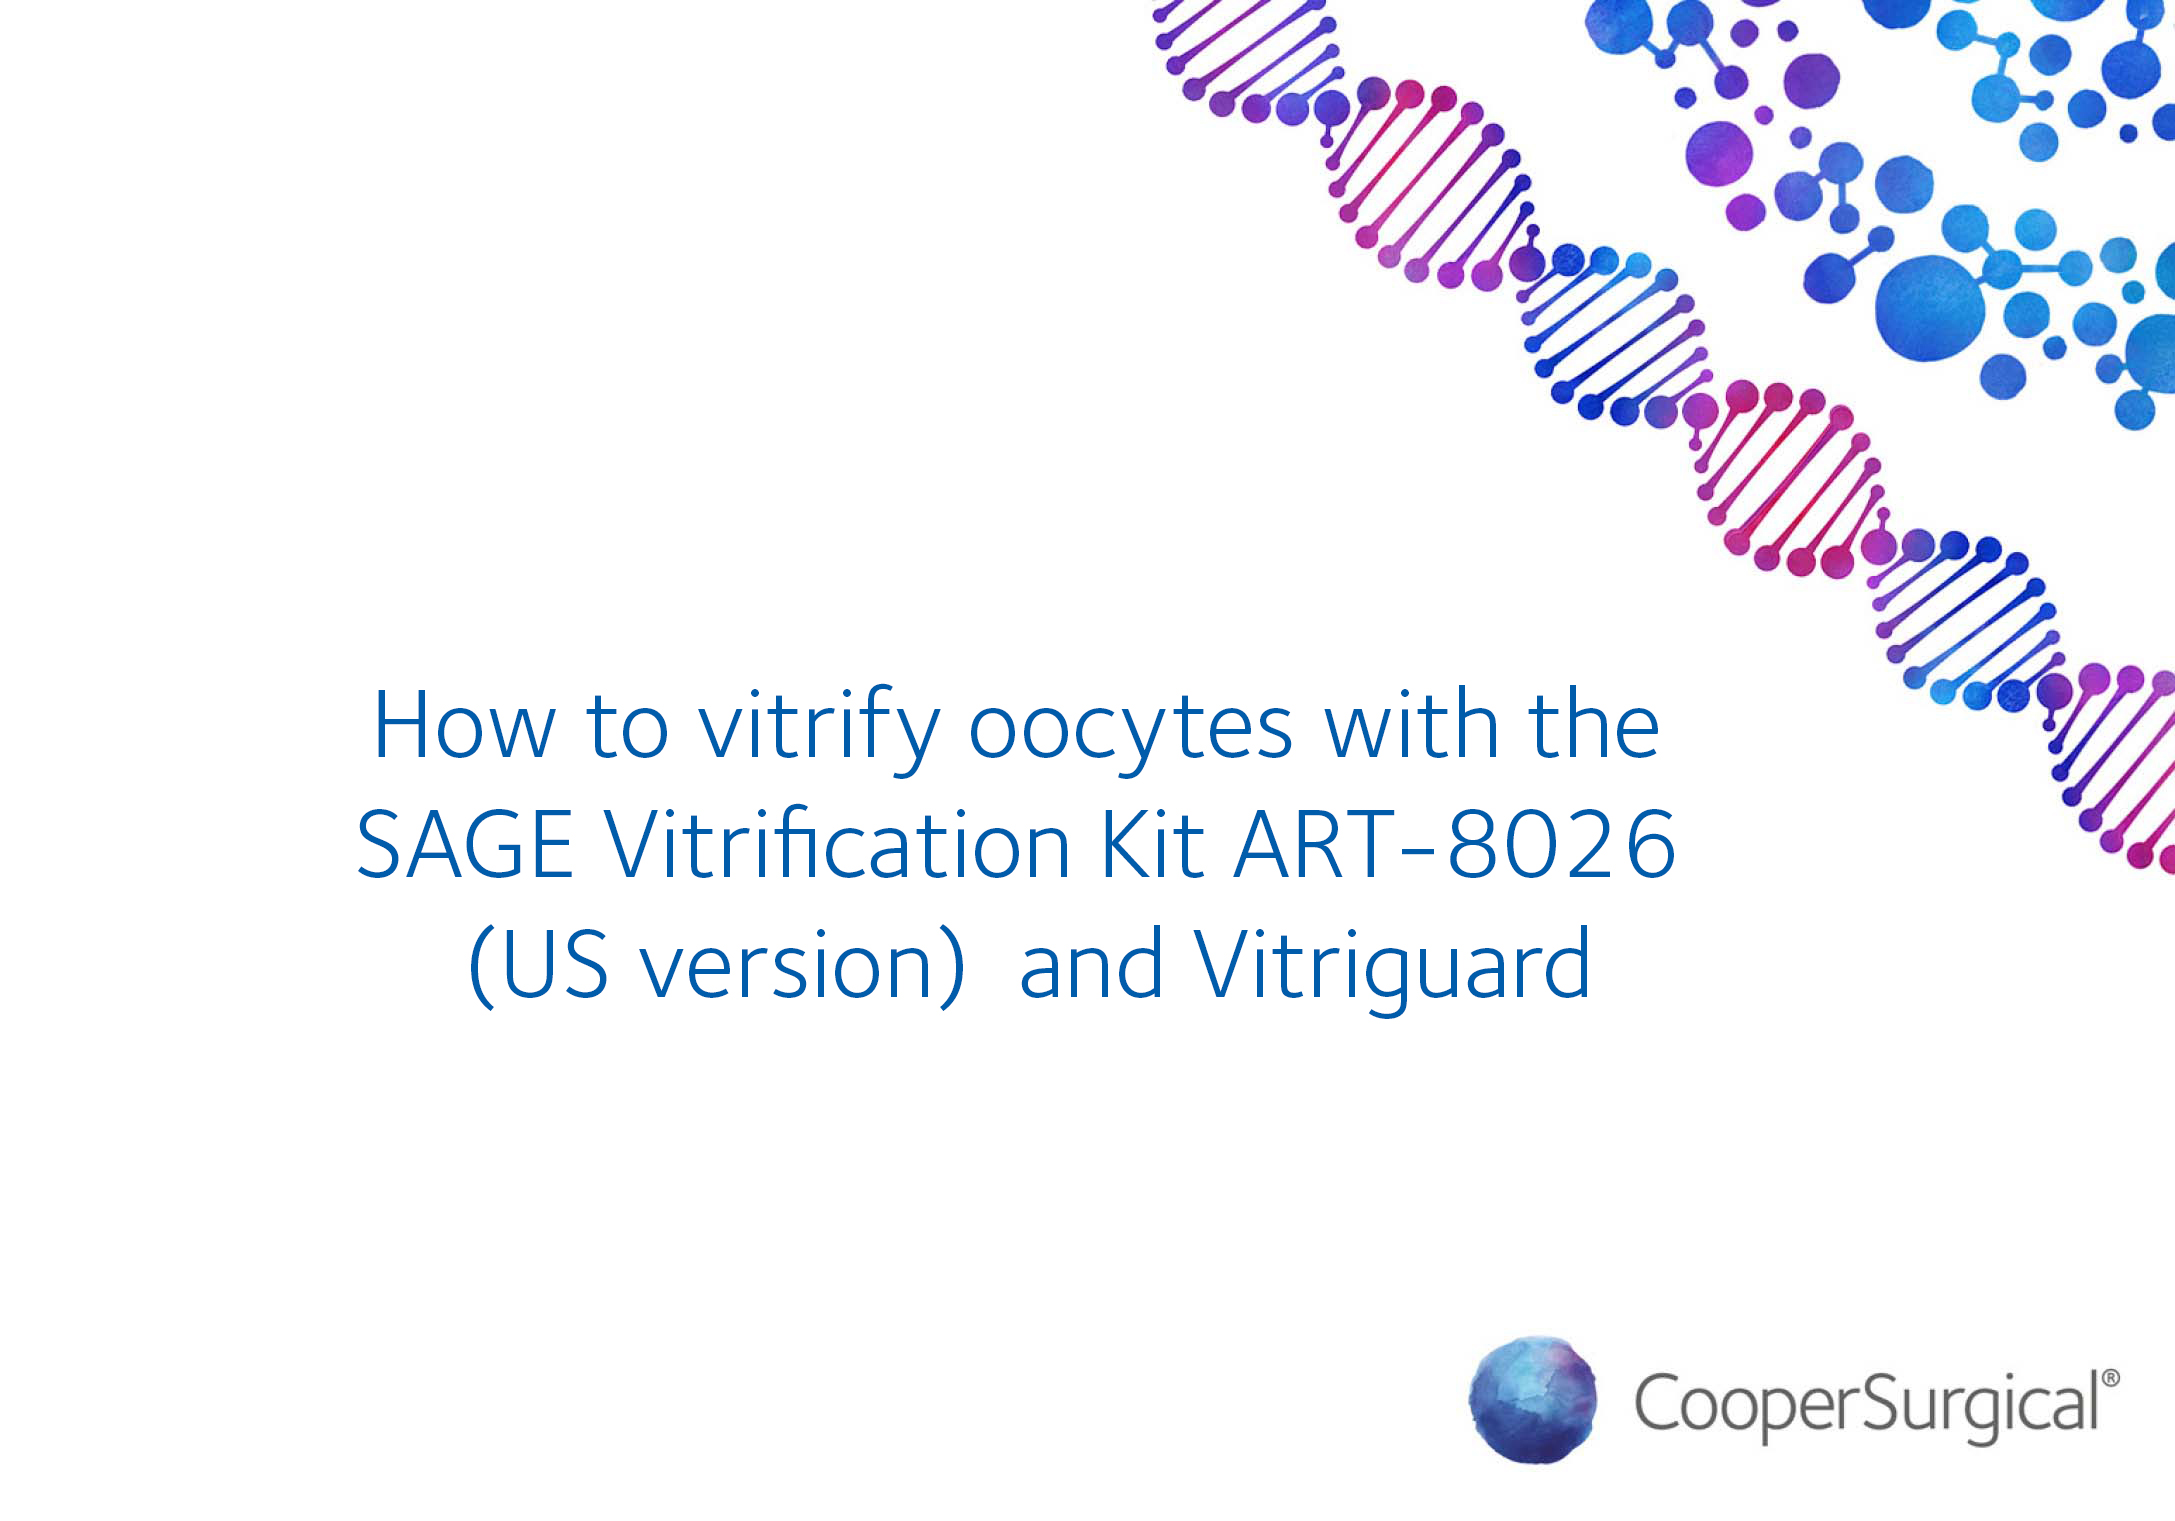 How to vitrify oocytes with the SAGE Vitrification Kit ART-8026 (US version) and Vitriguard